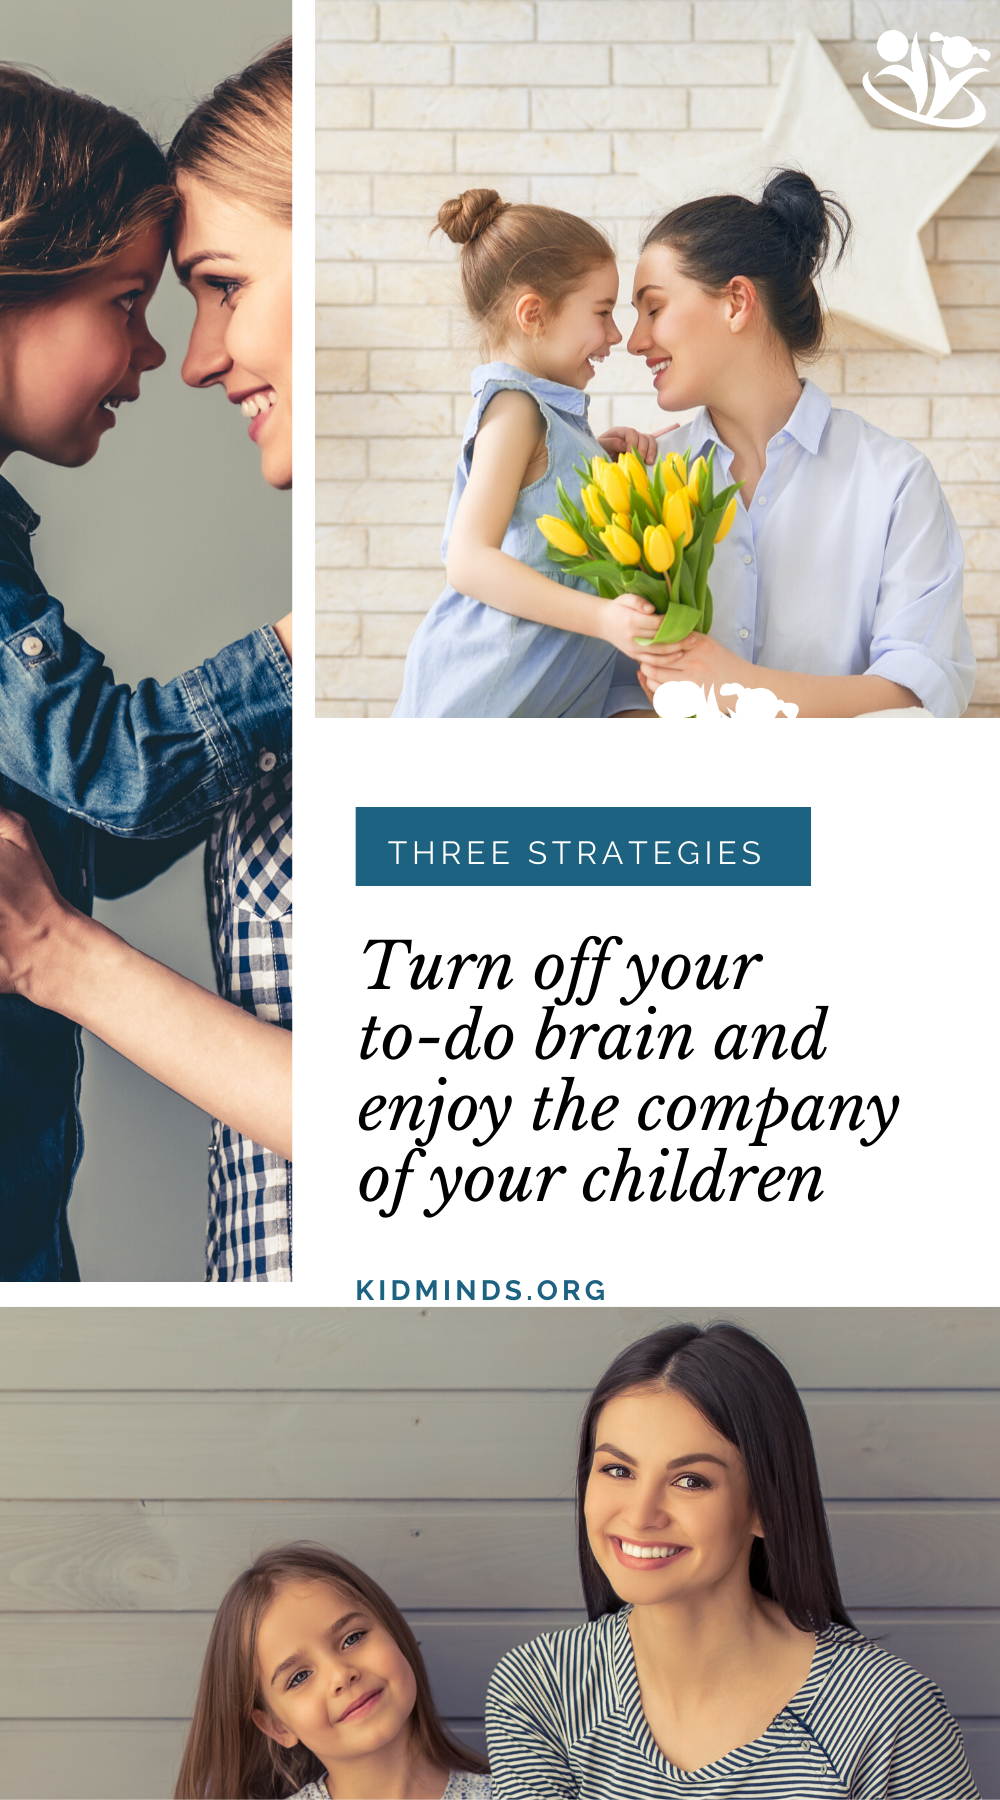 Three simple strategies to be a better mom in 15 minutes a day. It will help you slow down and just be there with your kids without doing anything or thinking of things on your to-do list. #mom